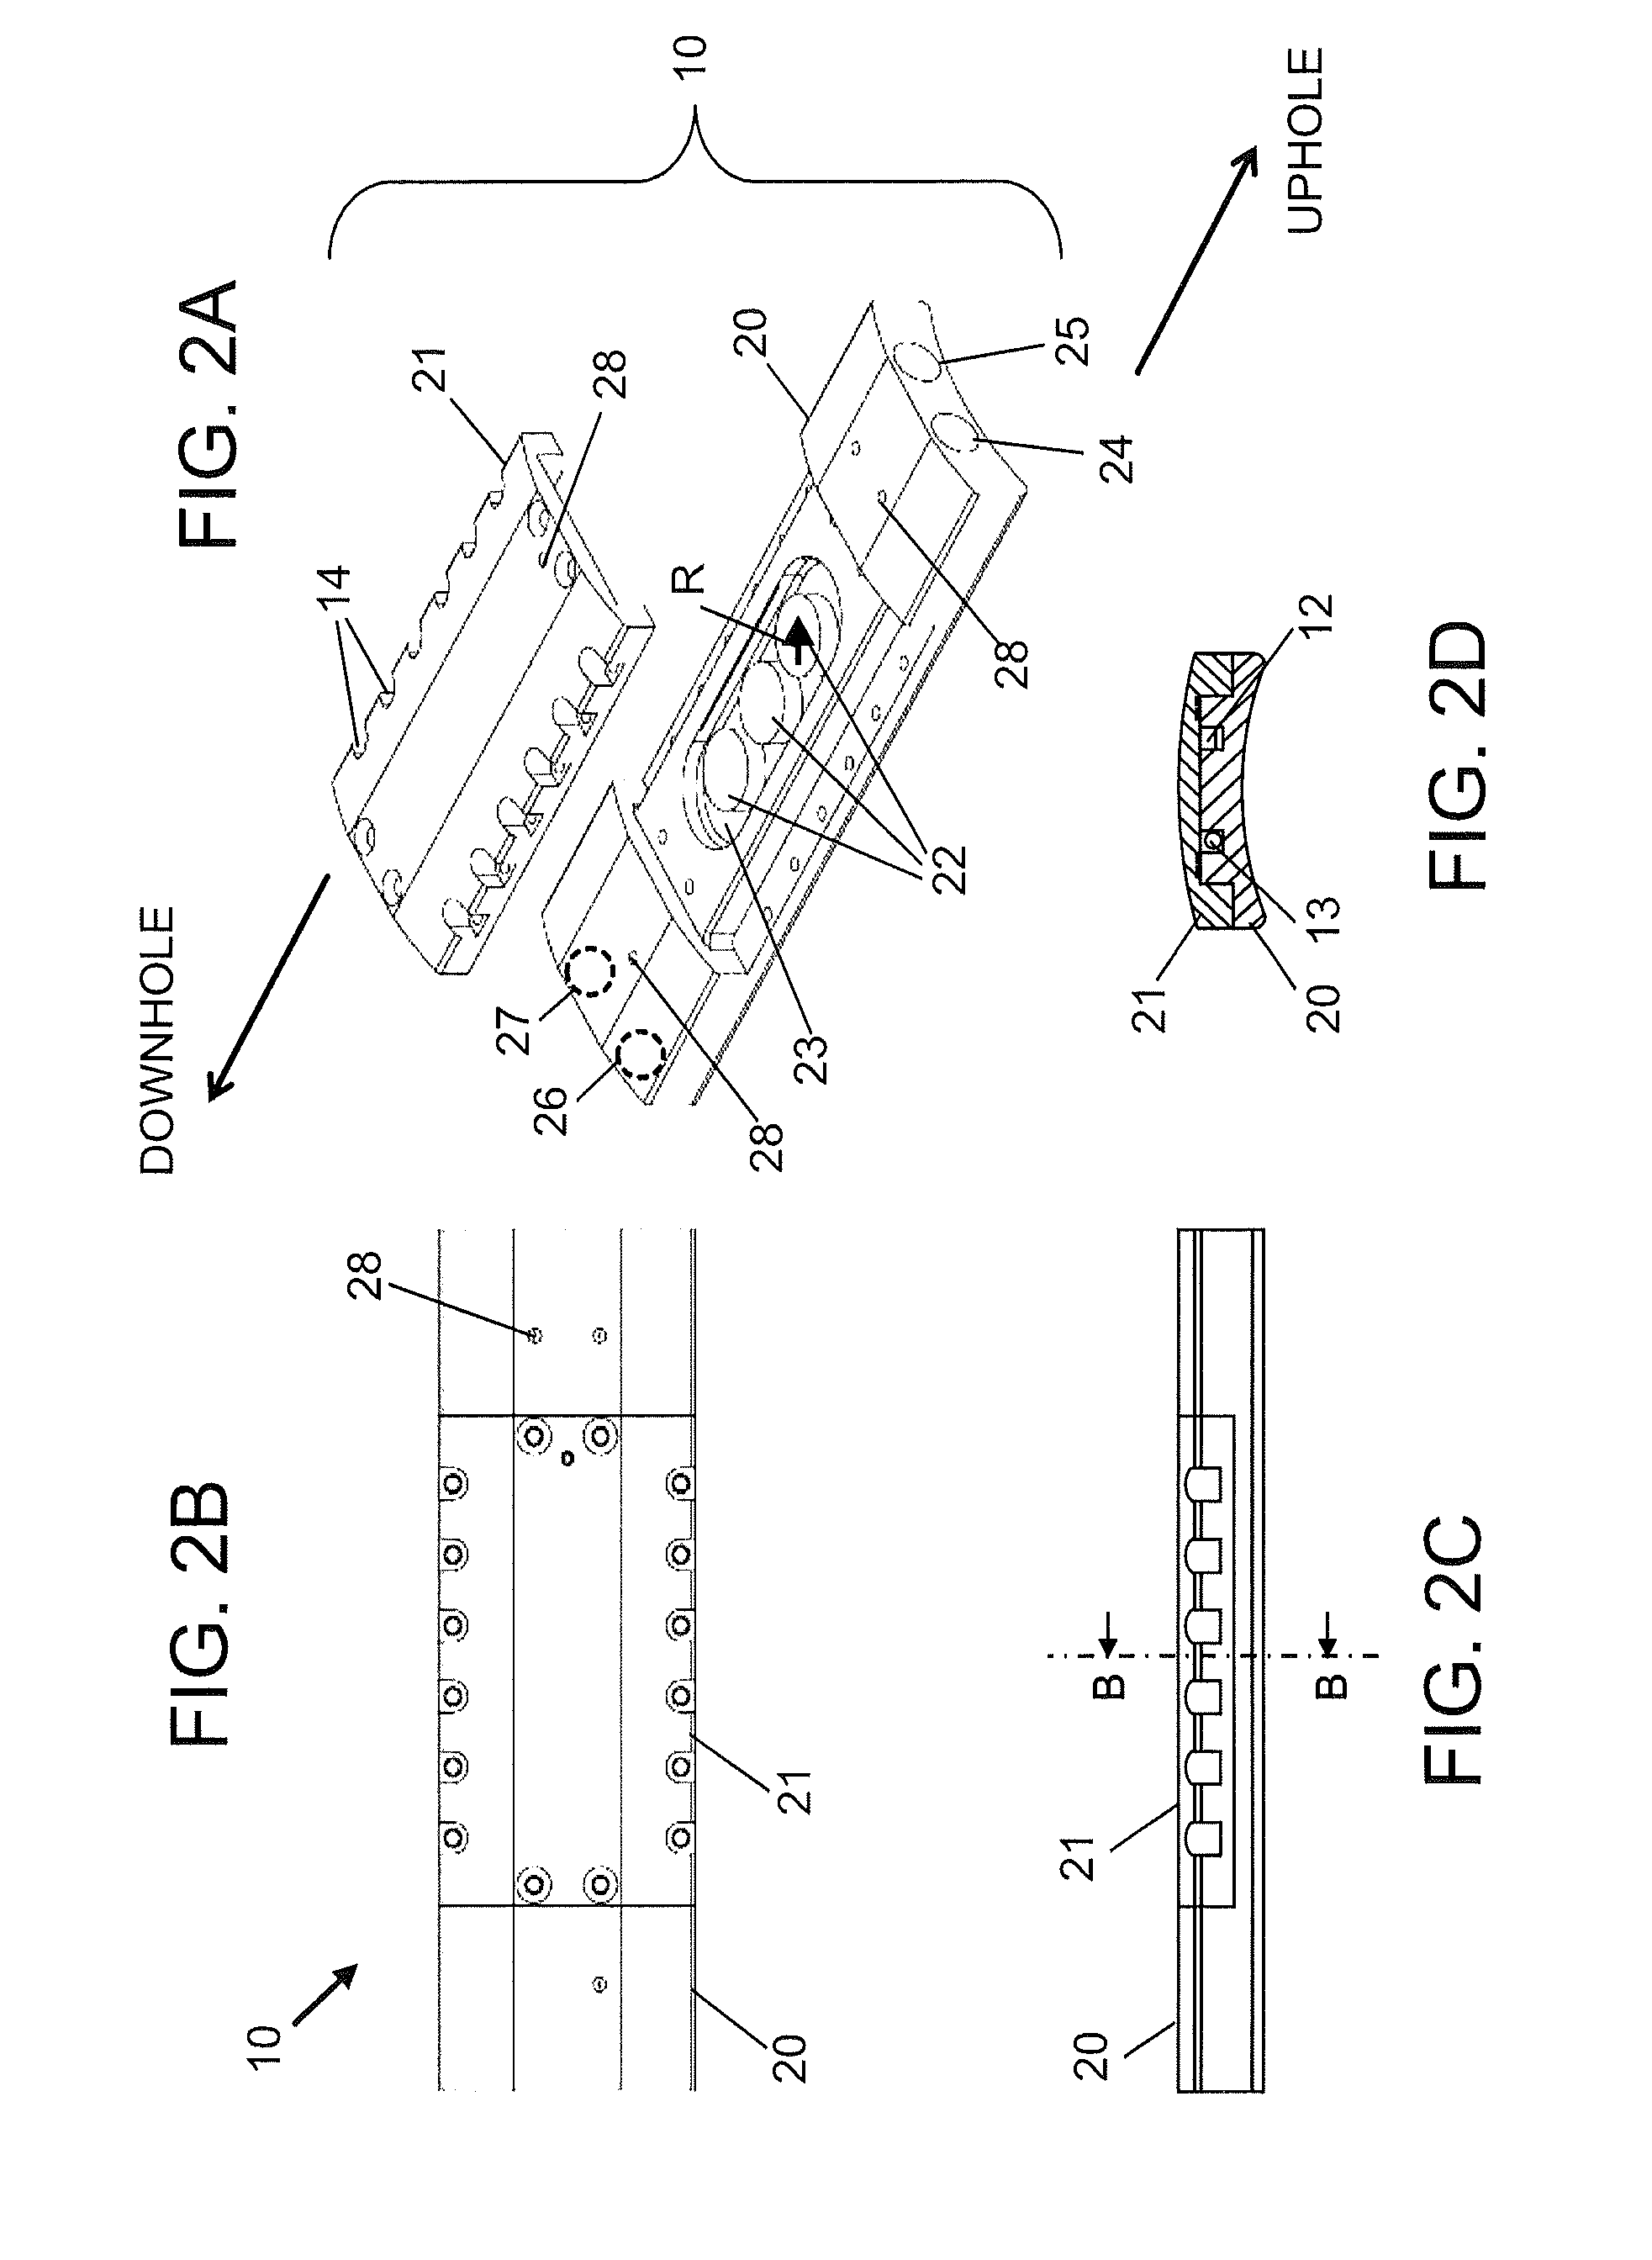 Method of deployment for real time casing imaging